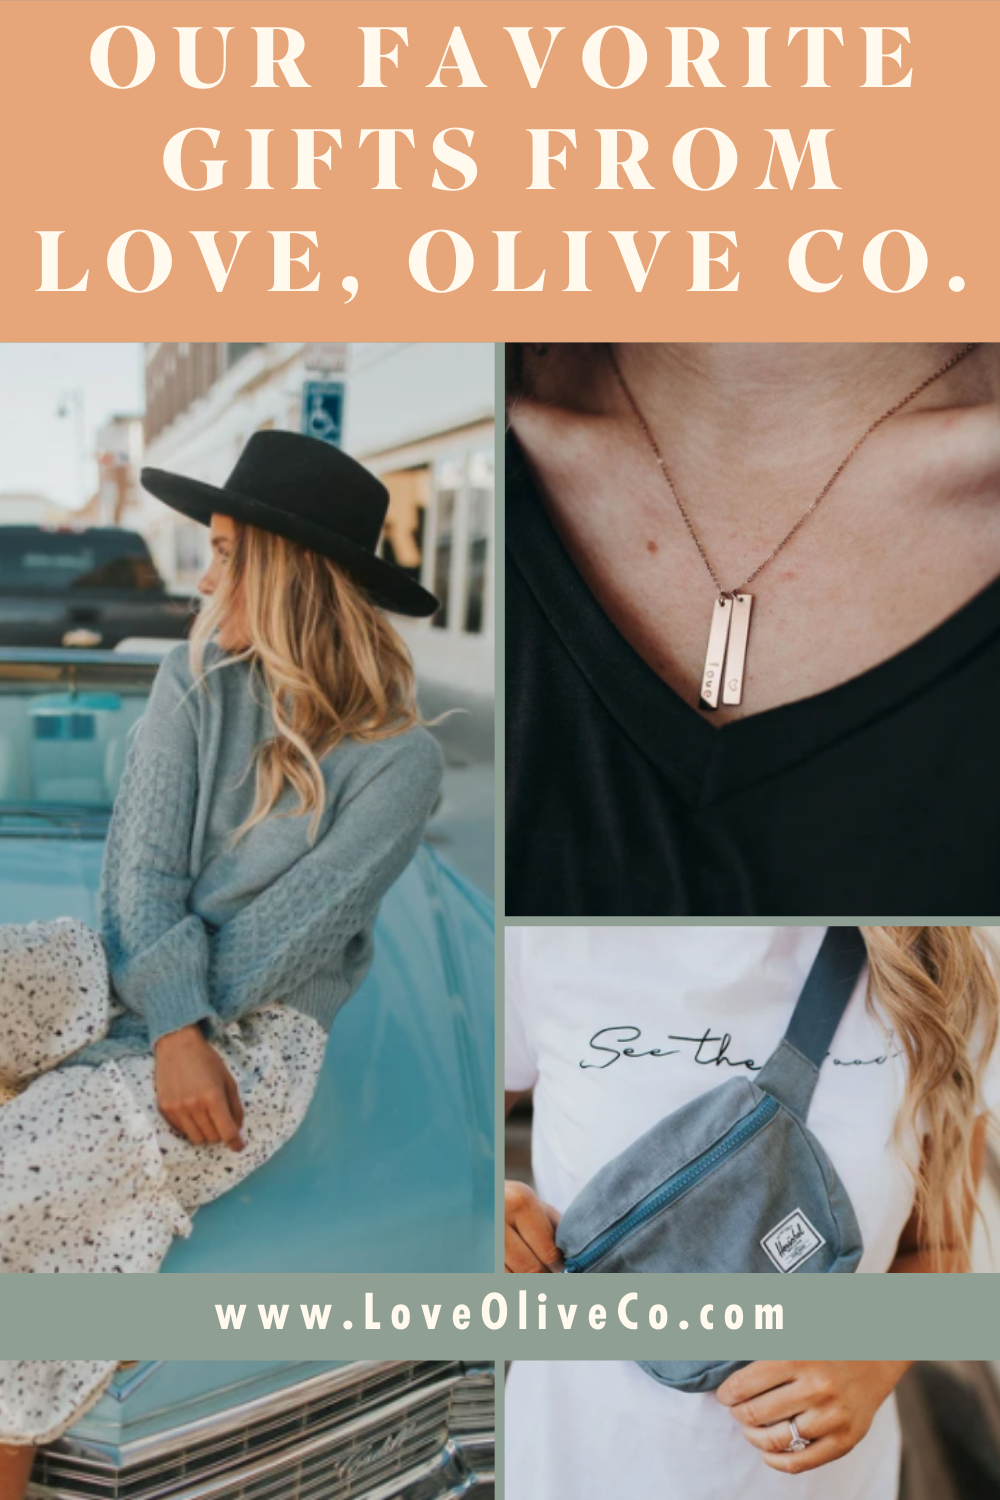 Our favorite gifts from Love, Olive Co.! Get her the gifts she really wants this year. www.loveoliveco.com/blogs